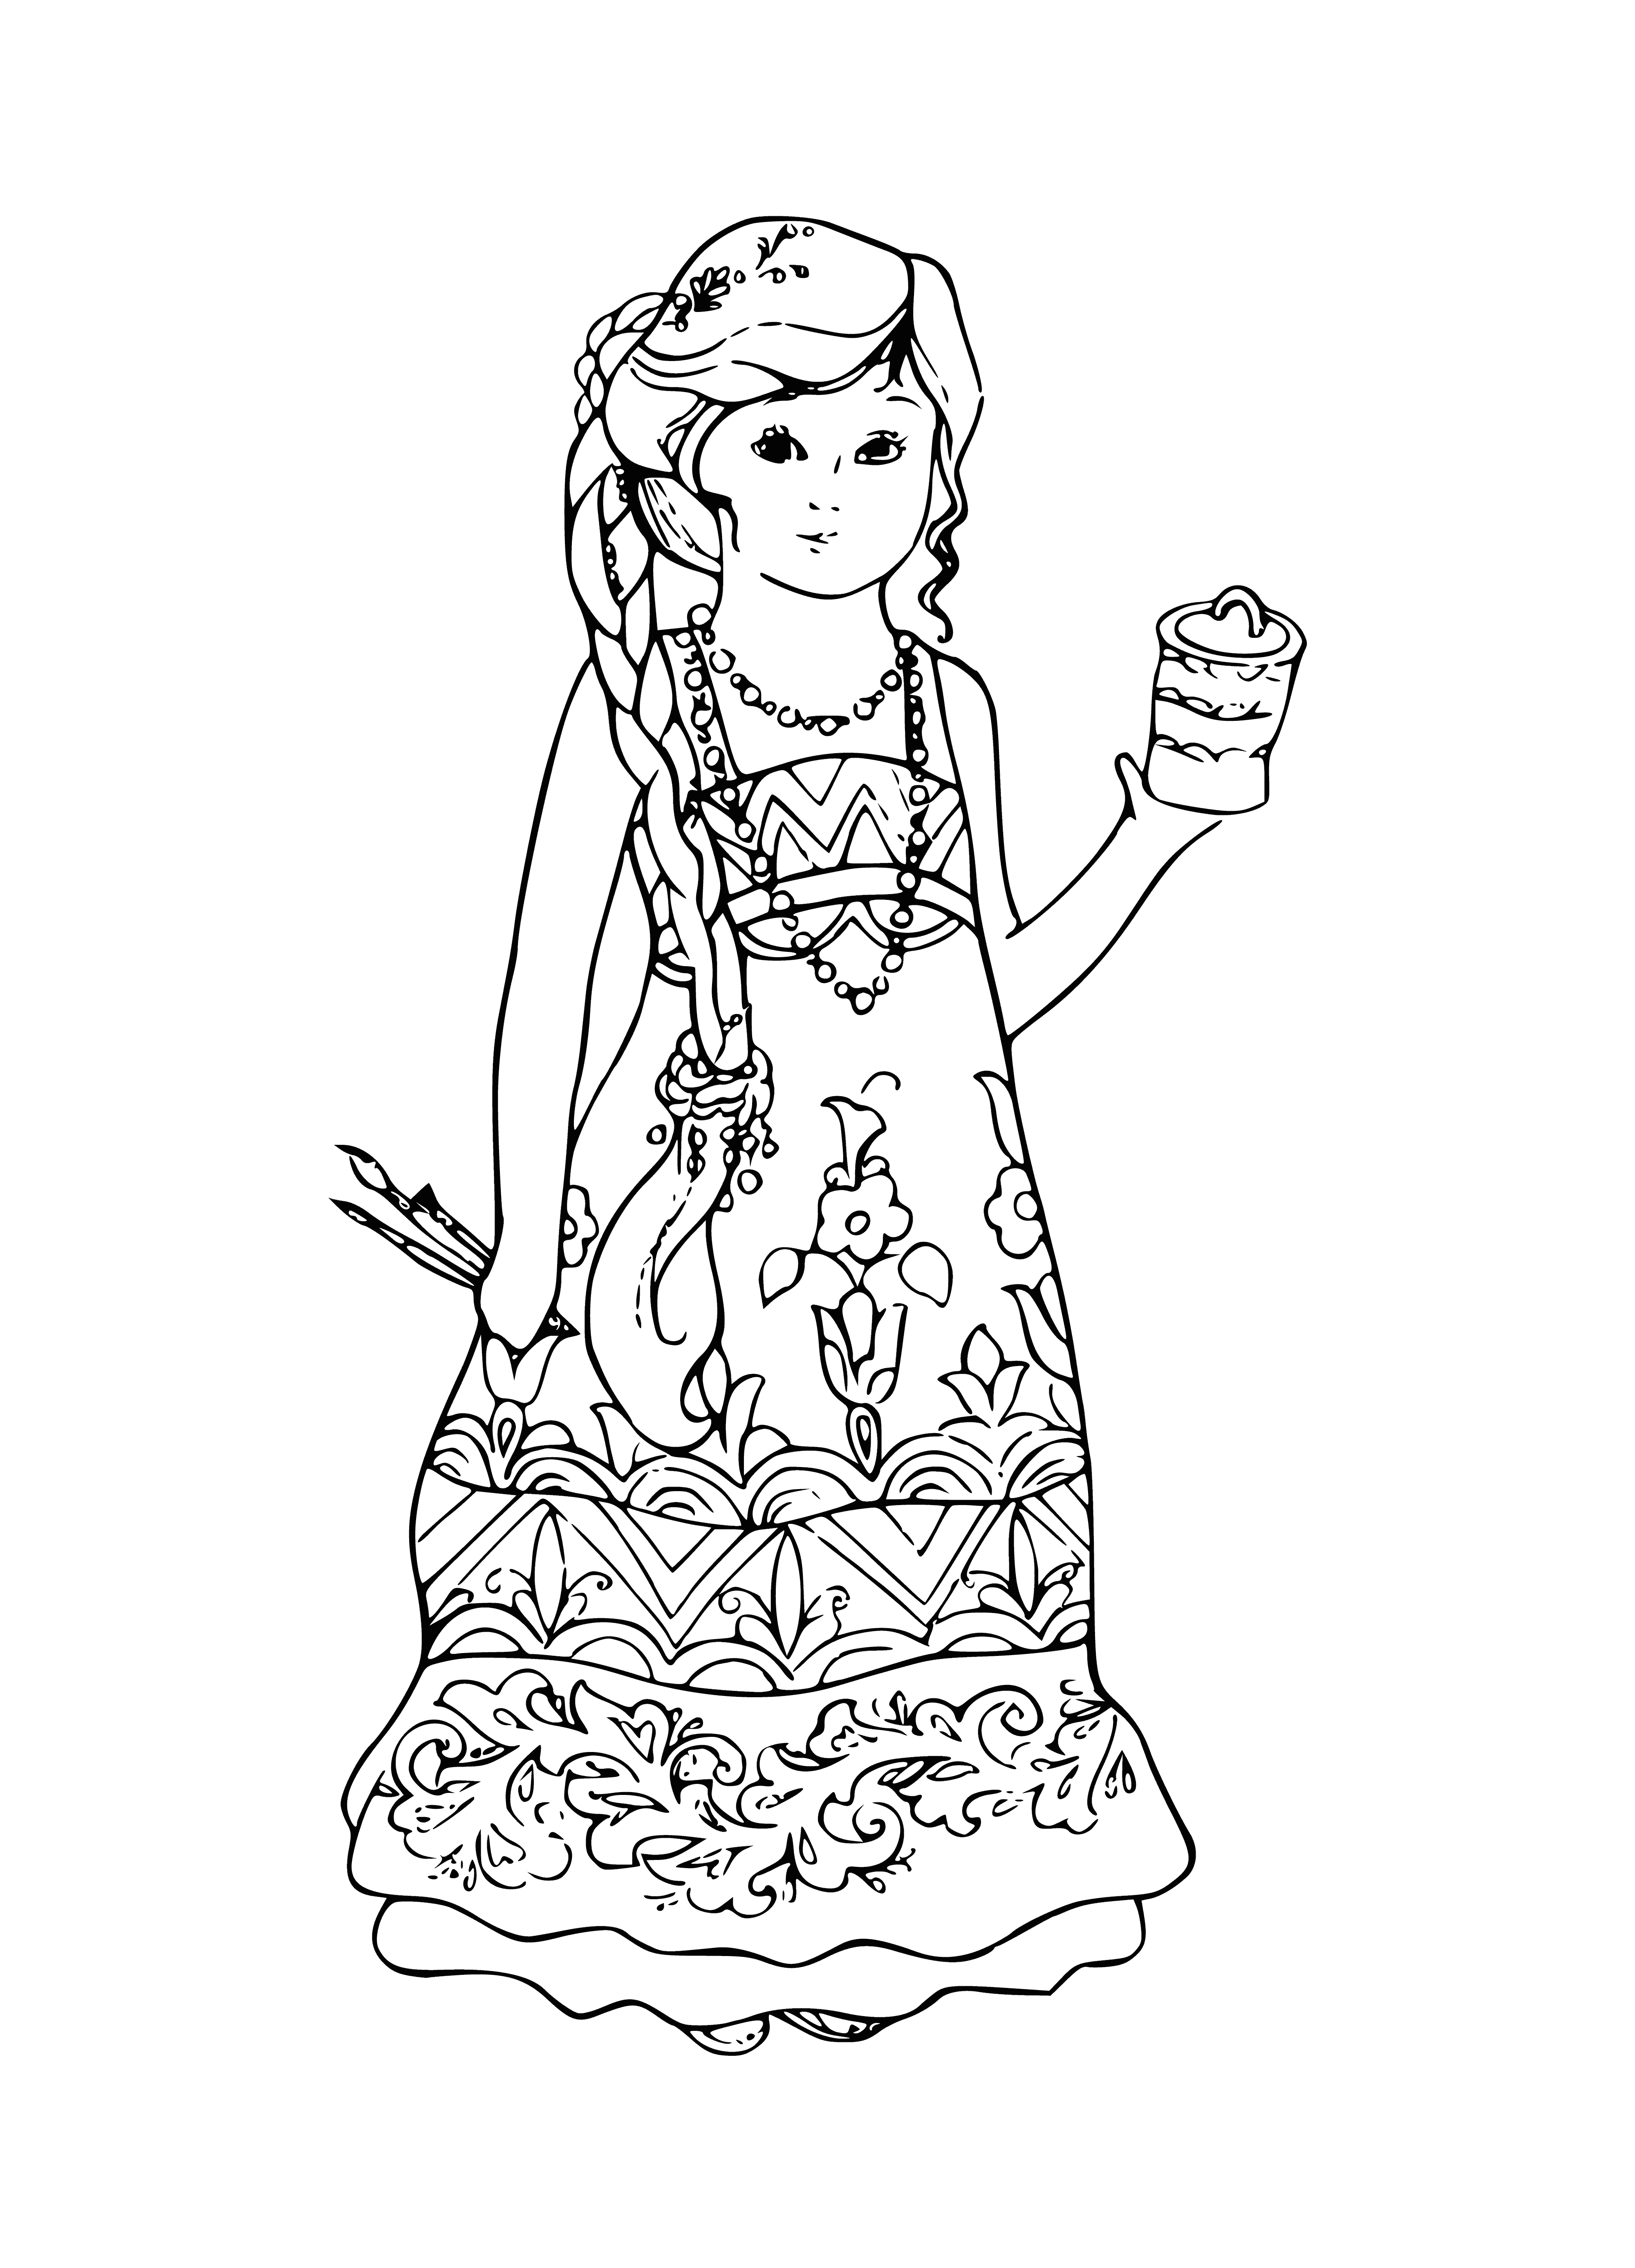 coloring page: Man in long robe, with staff and halo, admired by crowd. Mountain in background with cross on top.